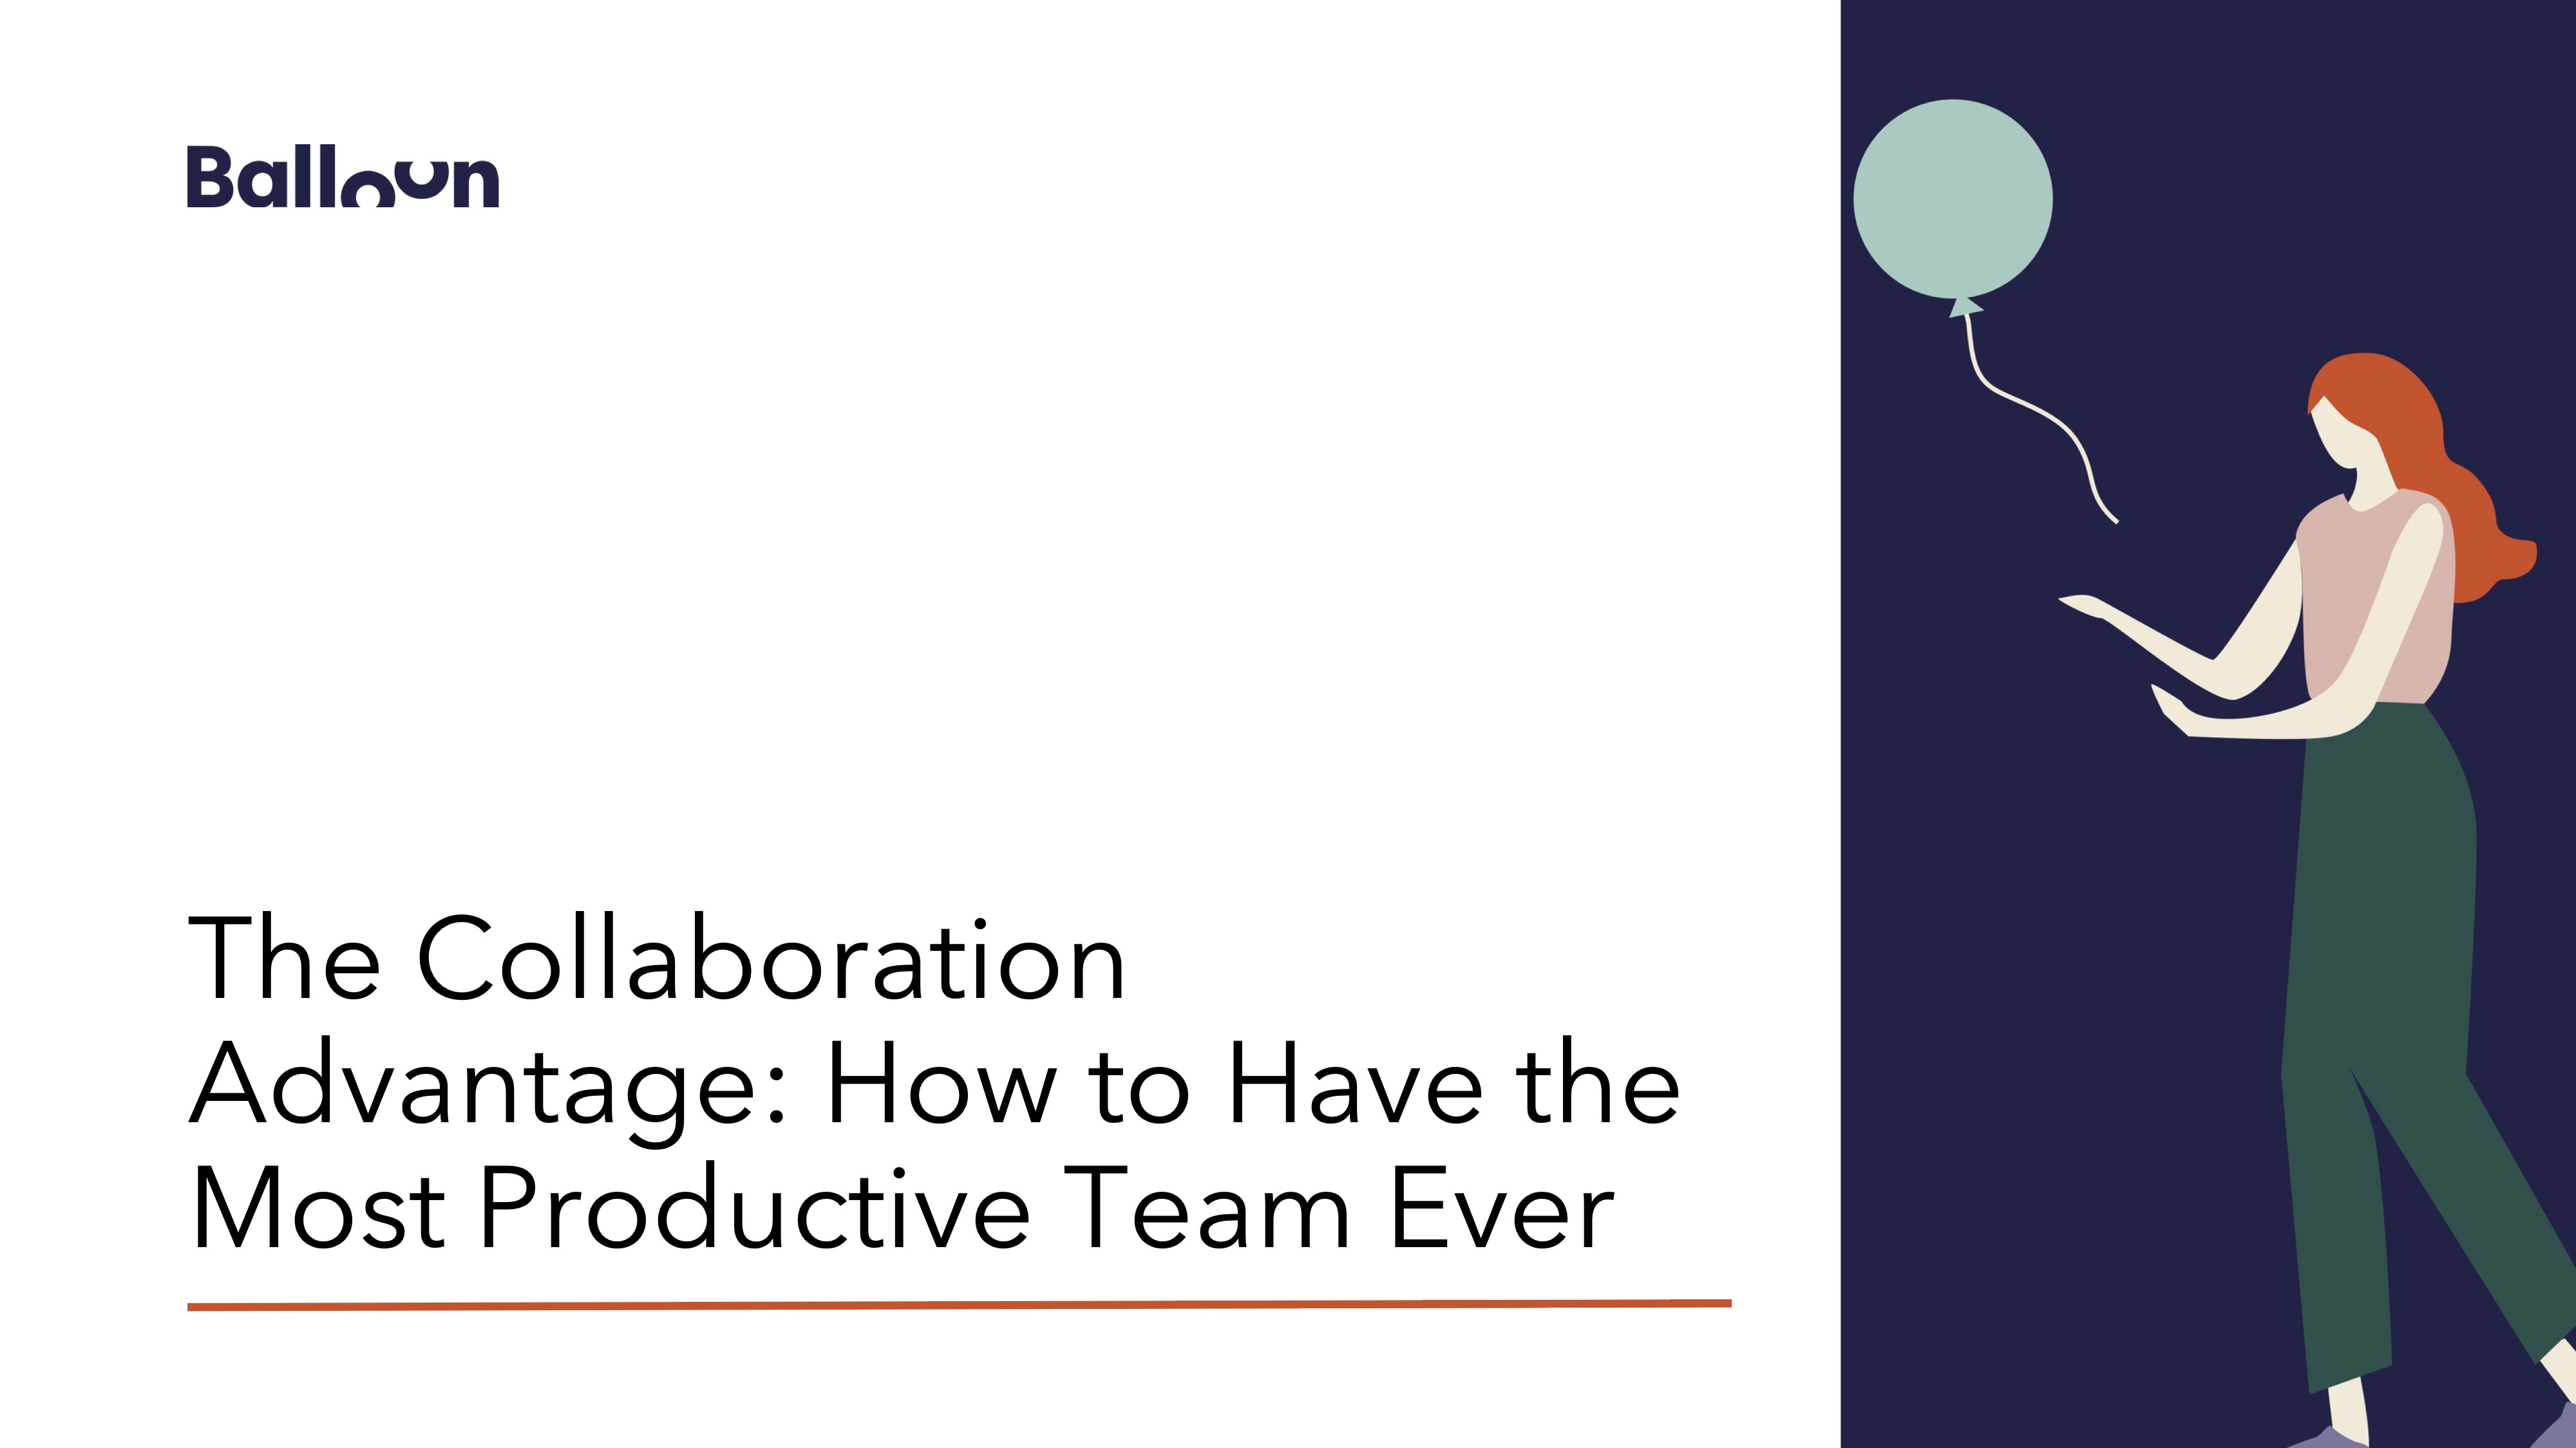 The Collaboration Advantage - How to Have the Most Productive Team Ever